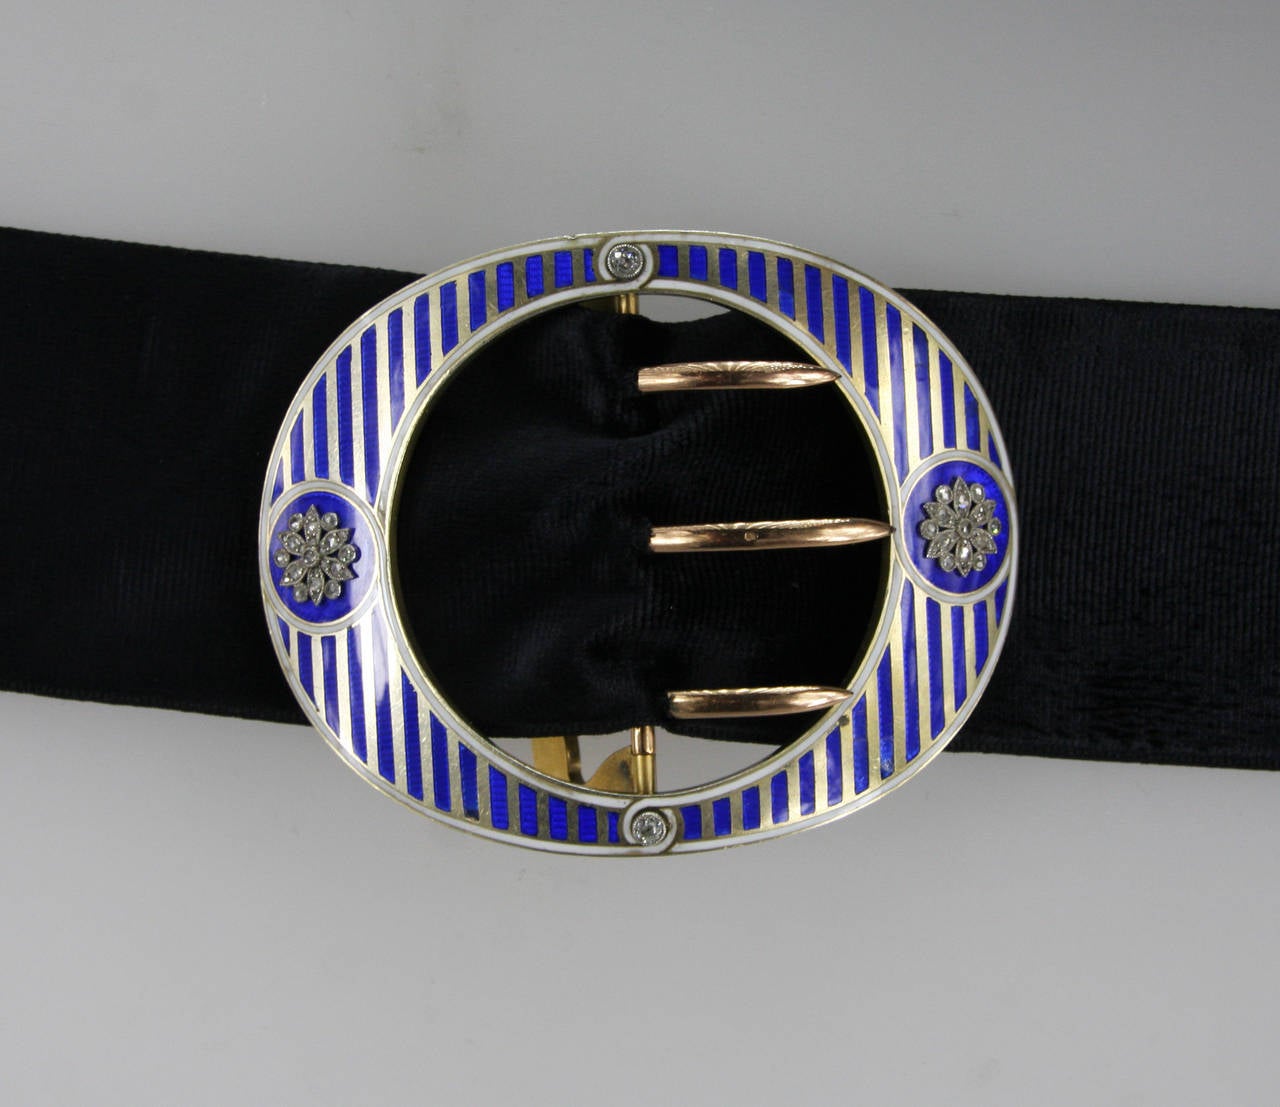 Rare 1900's Cartier belt buckle with flower motifs set with old mine cut diamonds. Signed 'Cartier Paris', numbered, with maker's mark and eagle stamp.